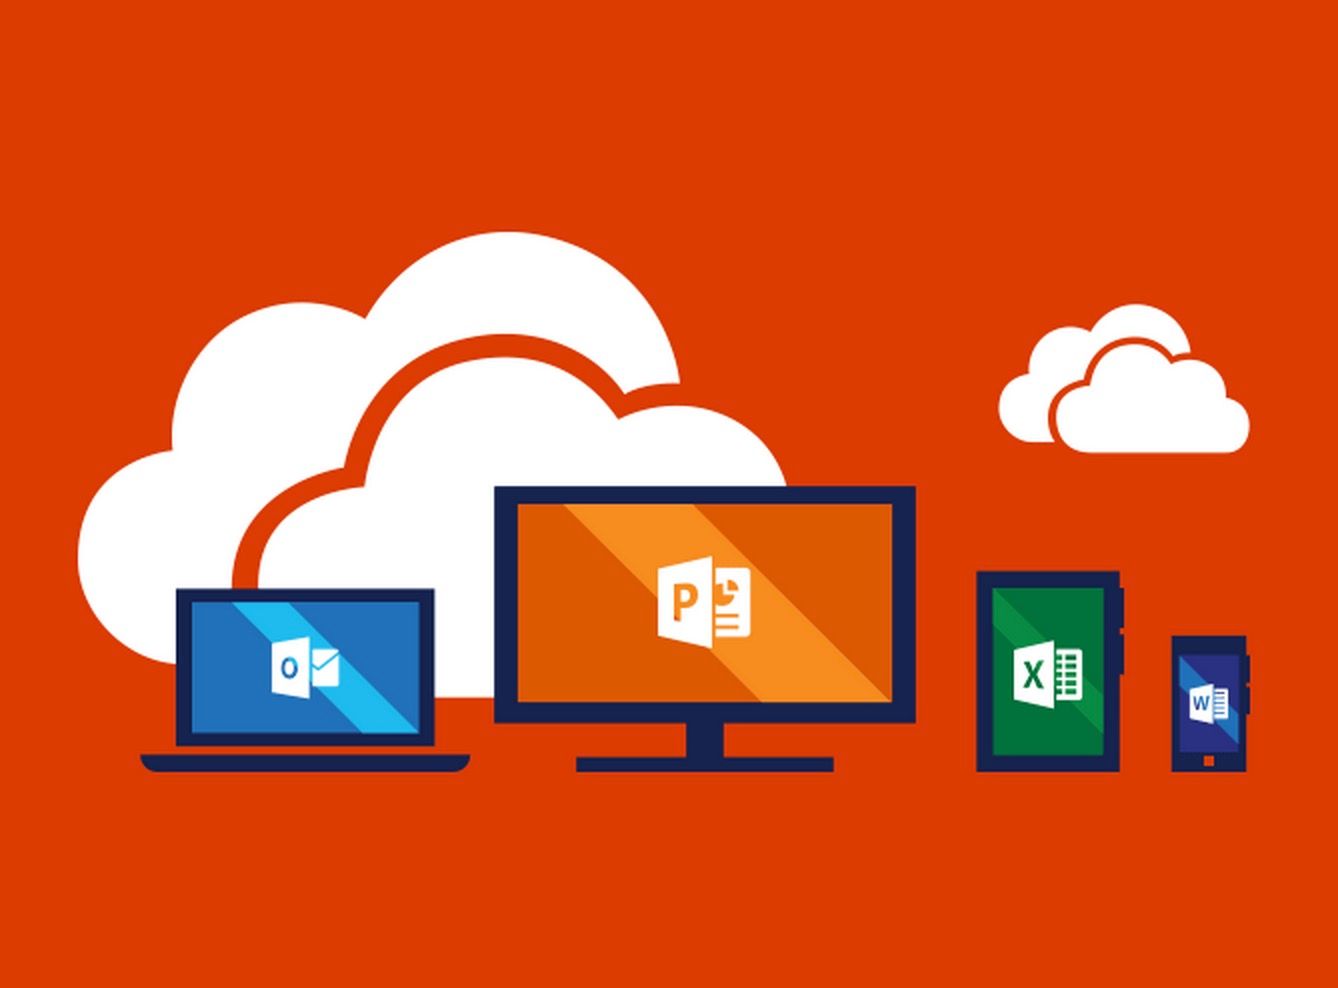 microsoft office 365 vs office touch apps vs office 2016 confusing but which one is for you image 3